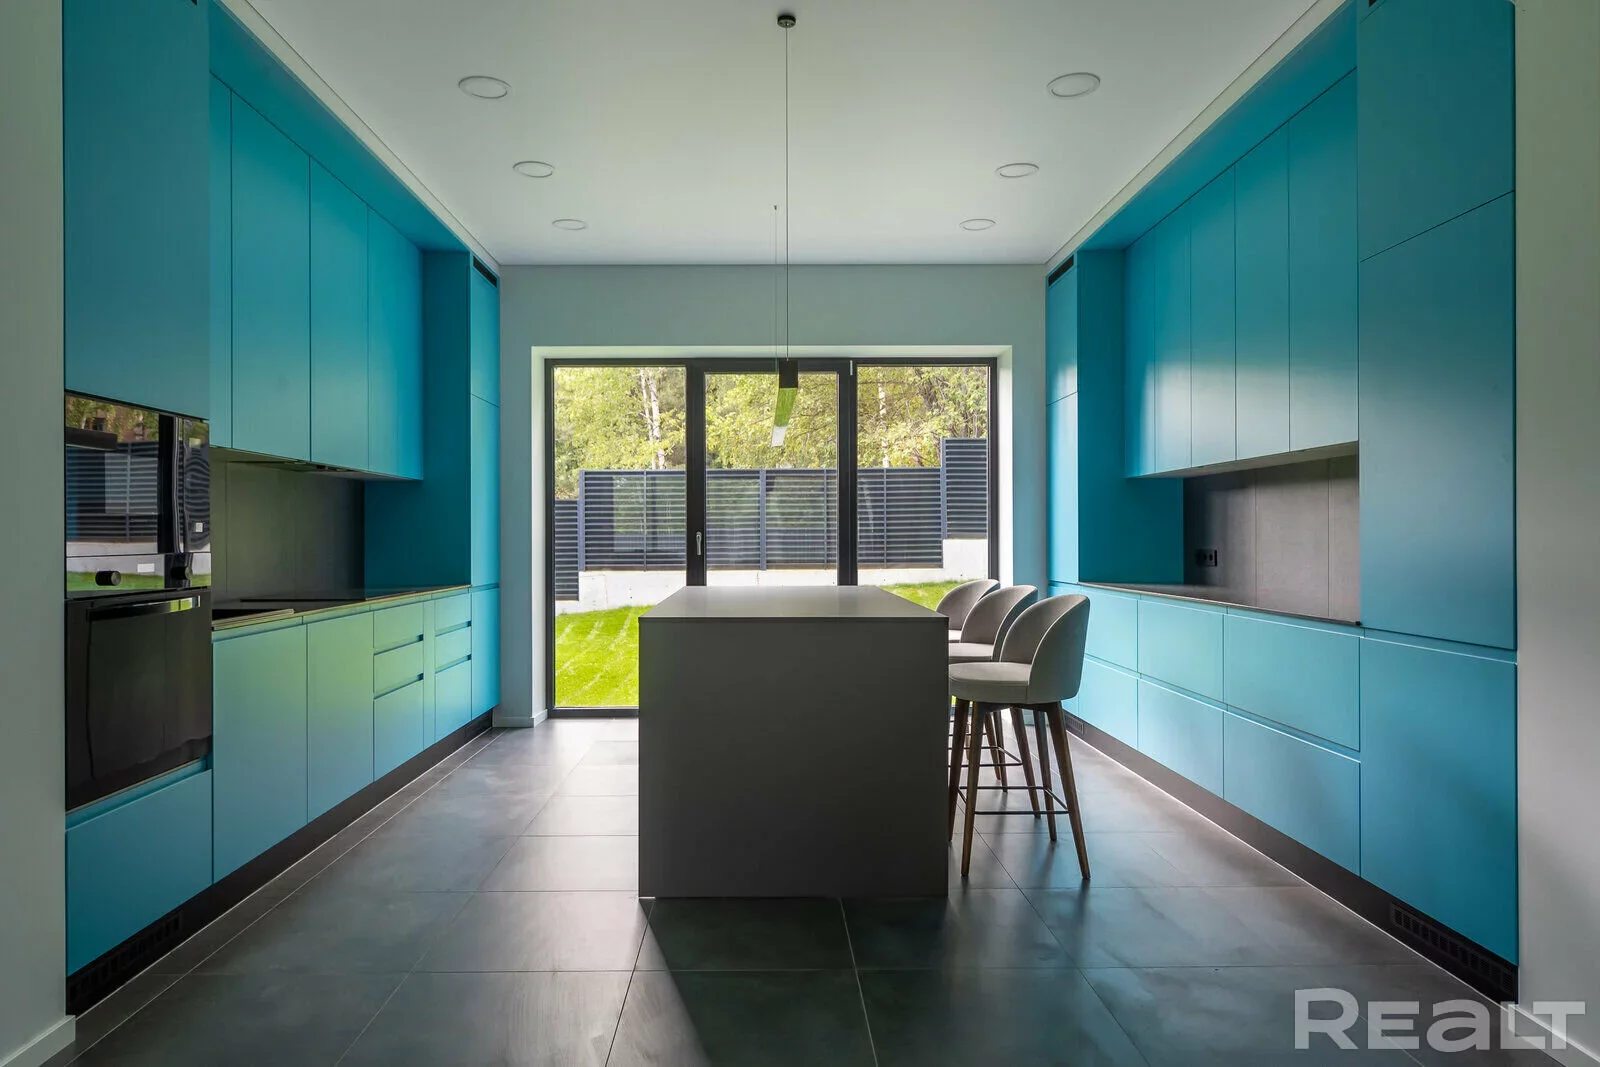 The blue front of the kitchen of a modern home